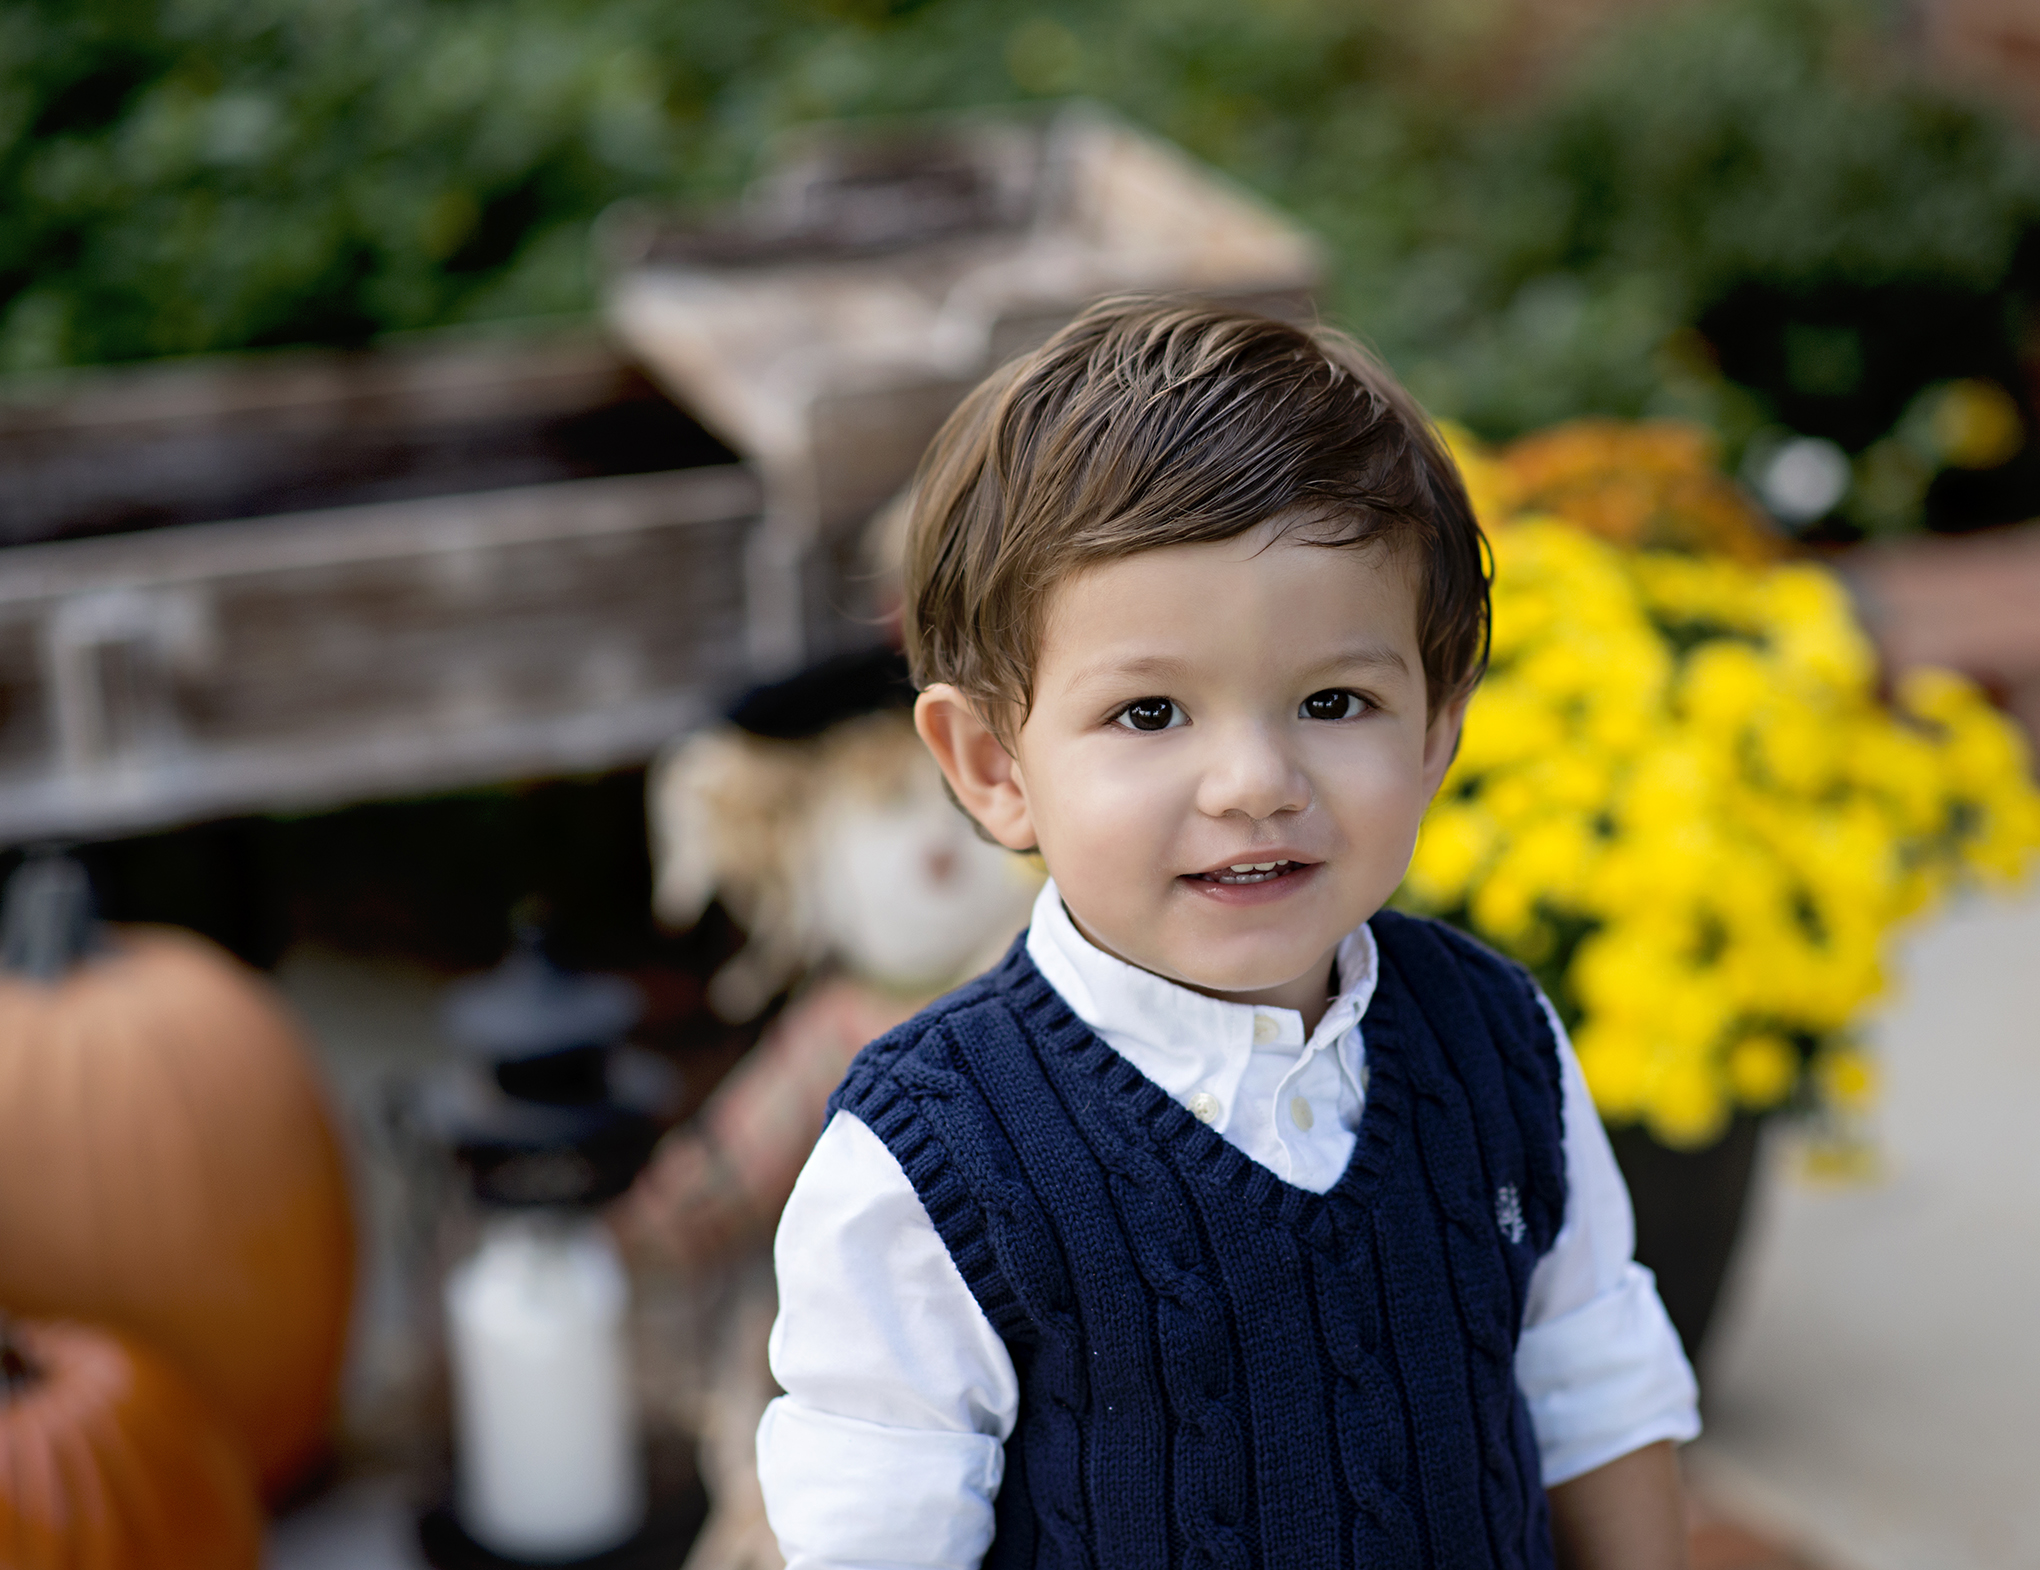 fun cousin session, fall colors, sweater weather, pumpkins, wagons, puddle jumping